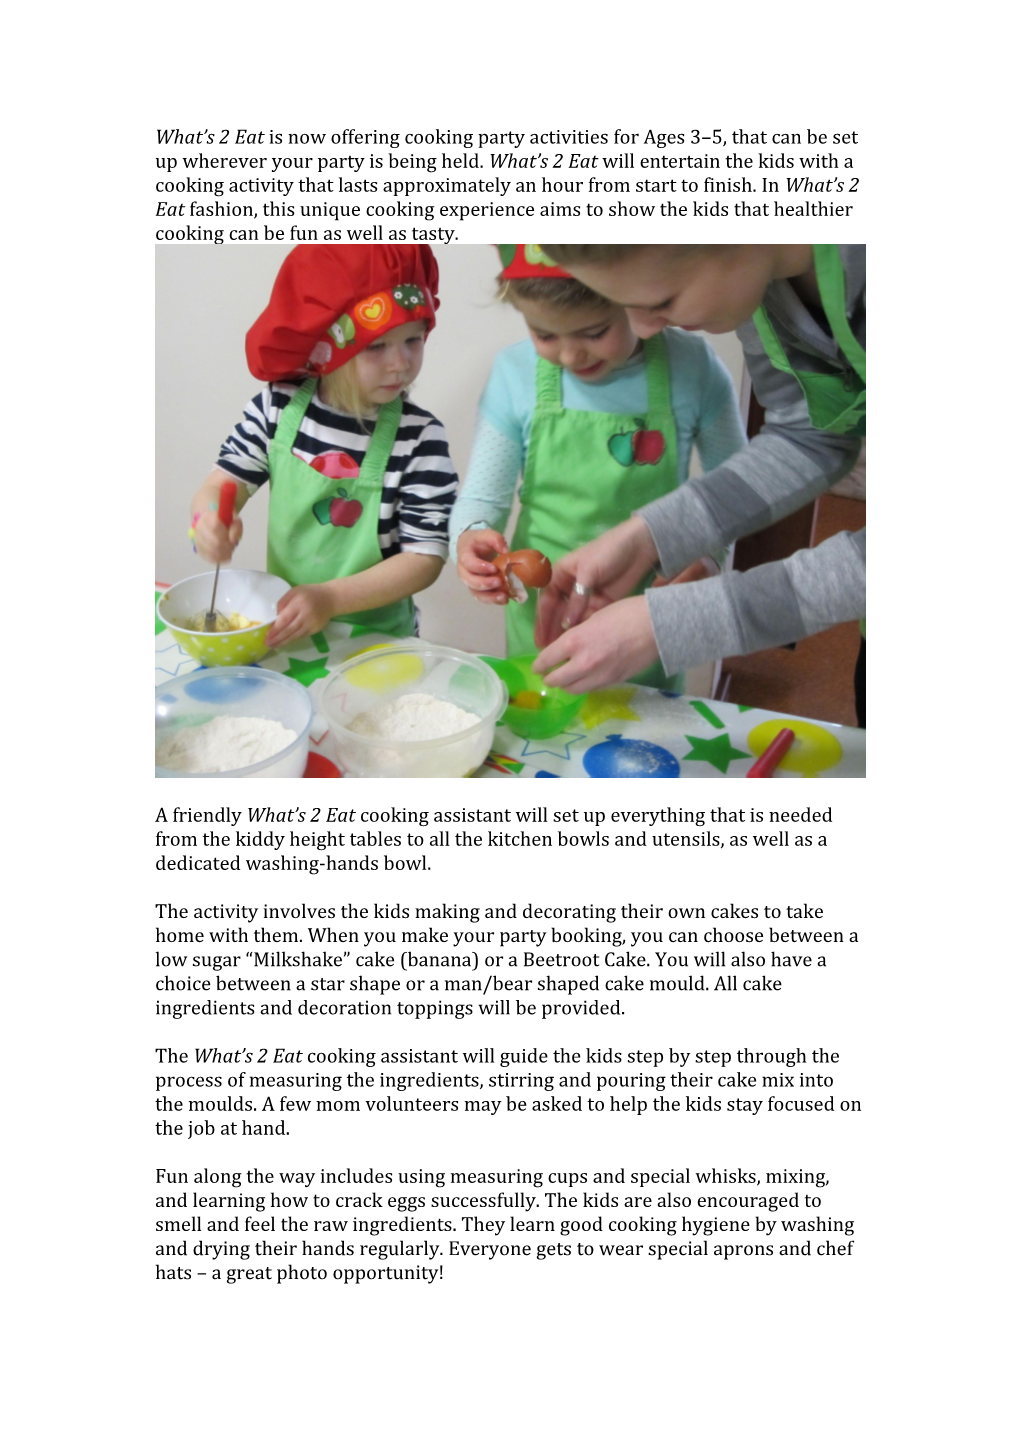 What S 2 Eat Is Now Offering Cooking Party Activities for Ages 3 5, That Can Be Set Up